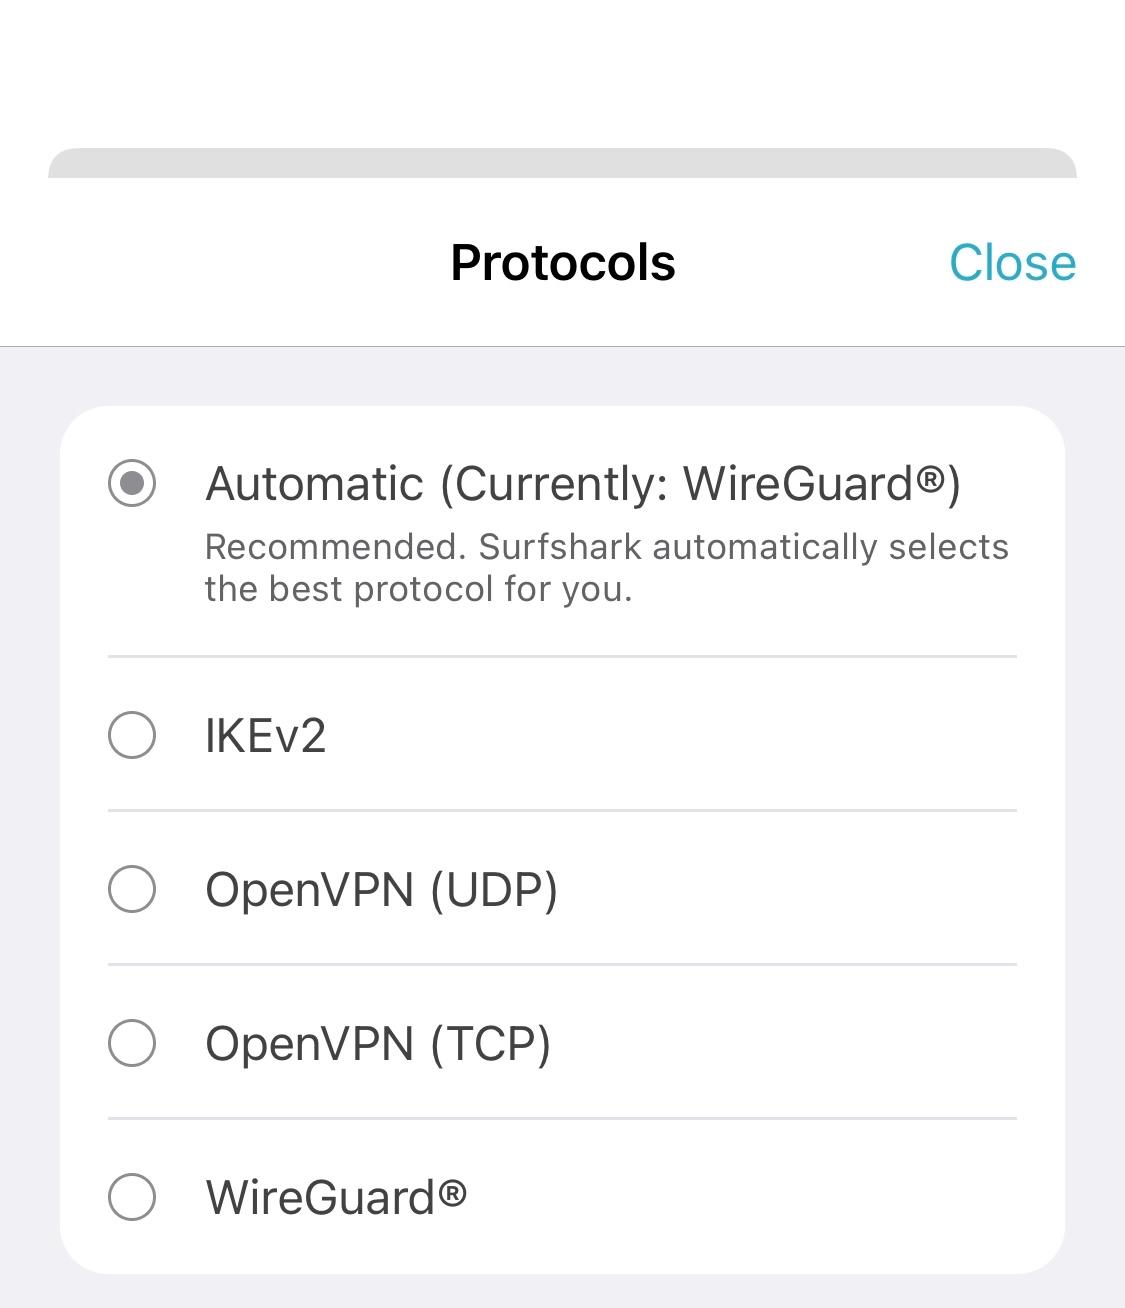 A screenshot of the Surfshark VPN protocol options, including WireGuard, IKEv2, and OpenVPN, on its mobile app.